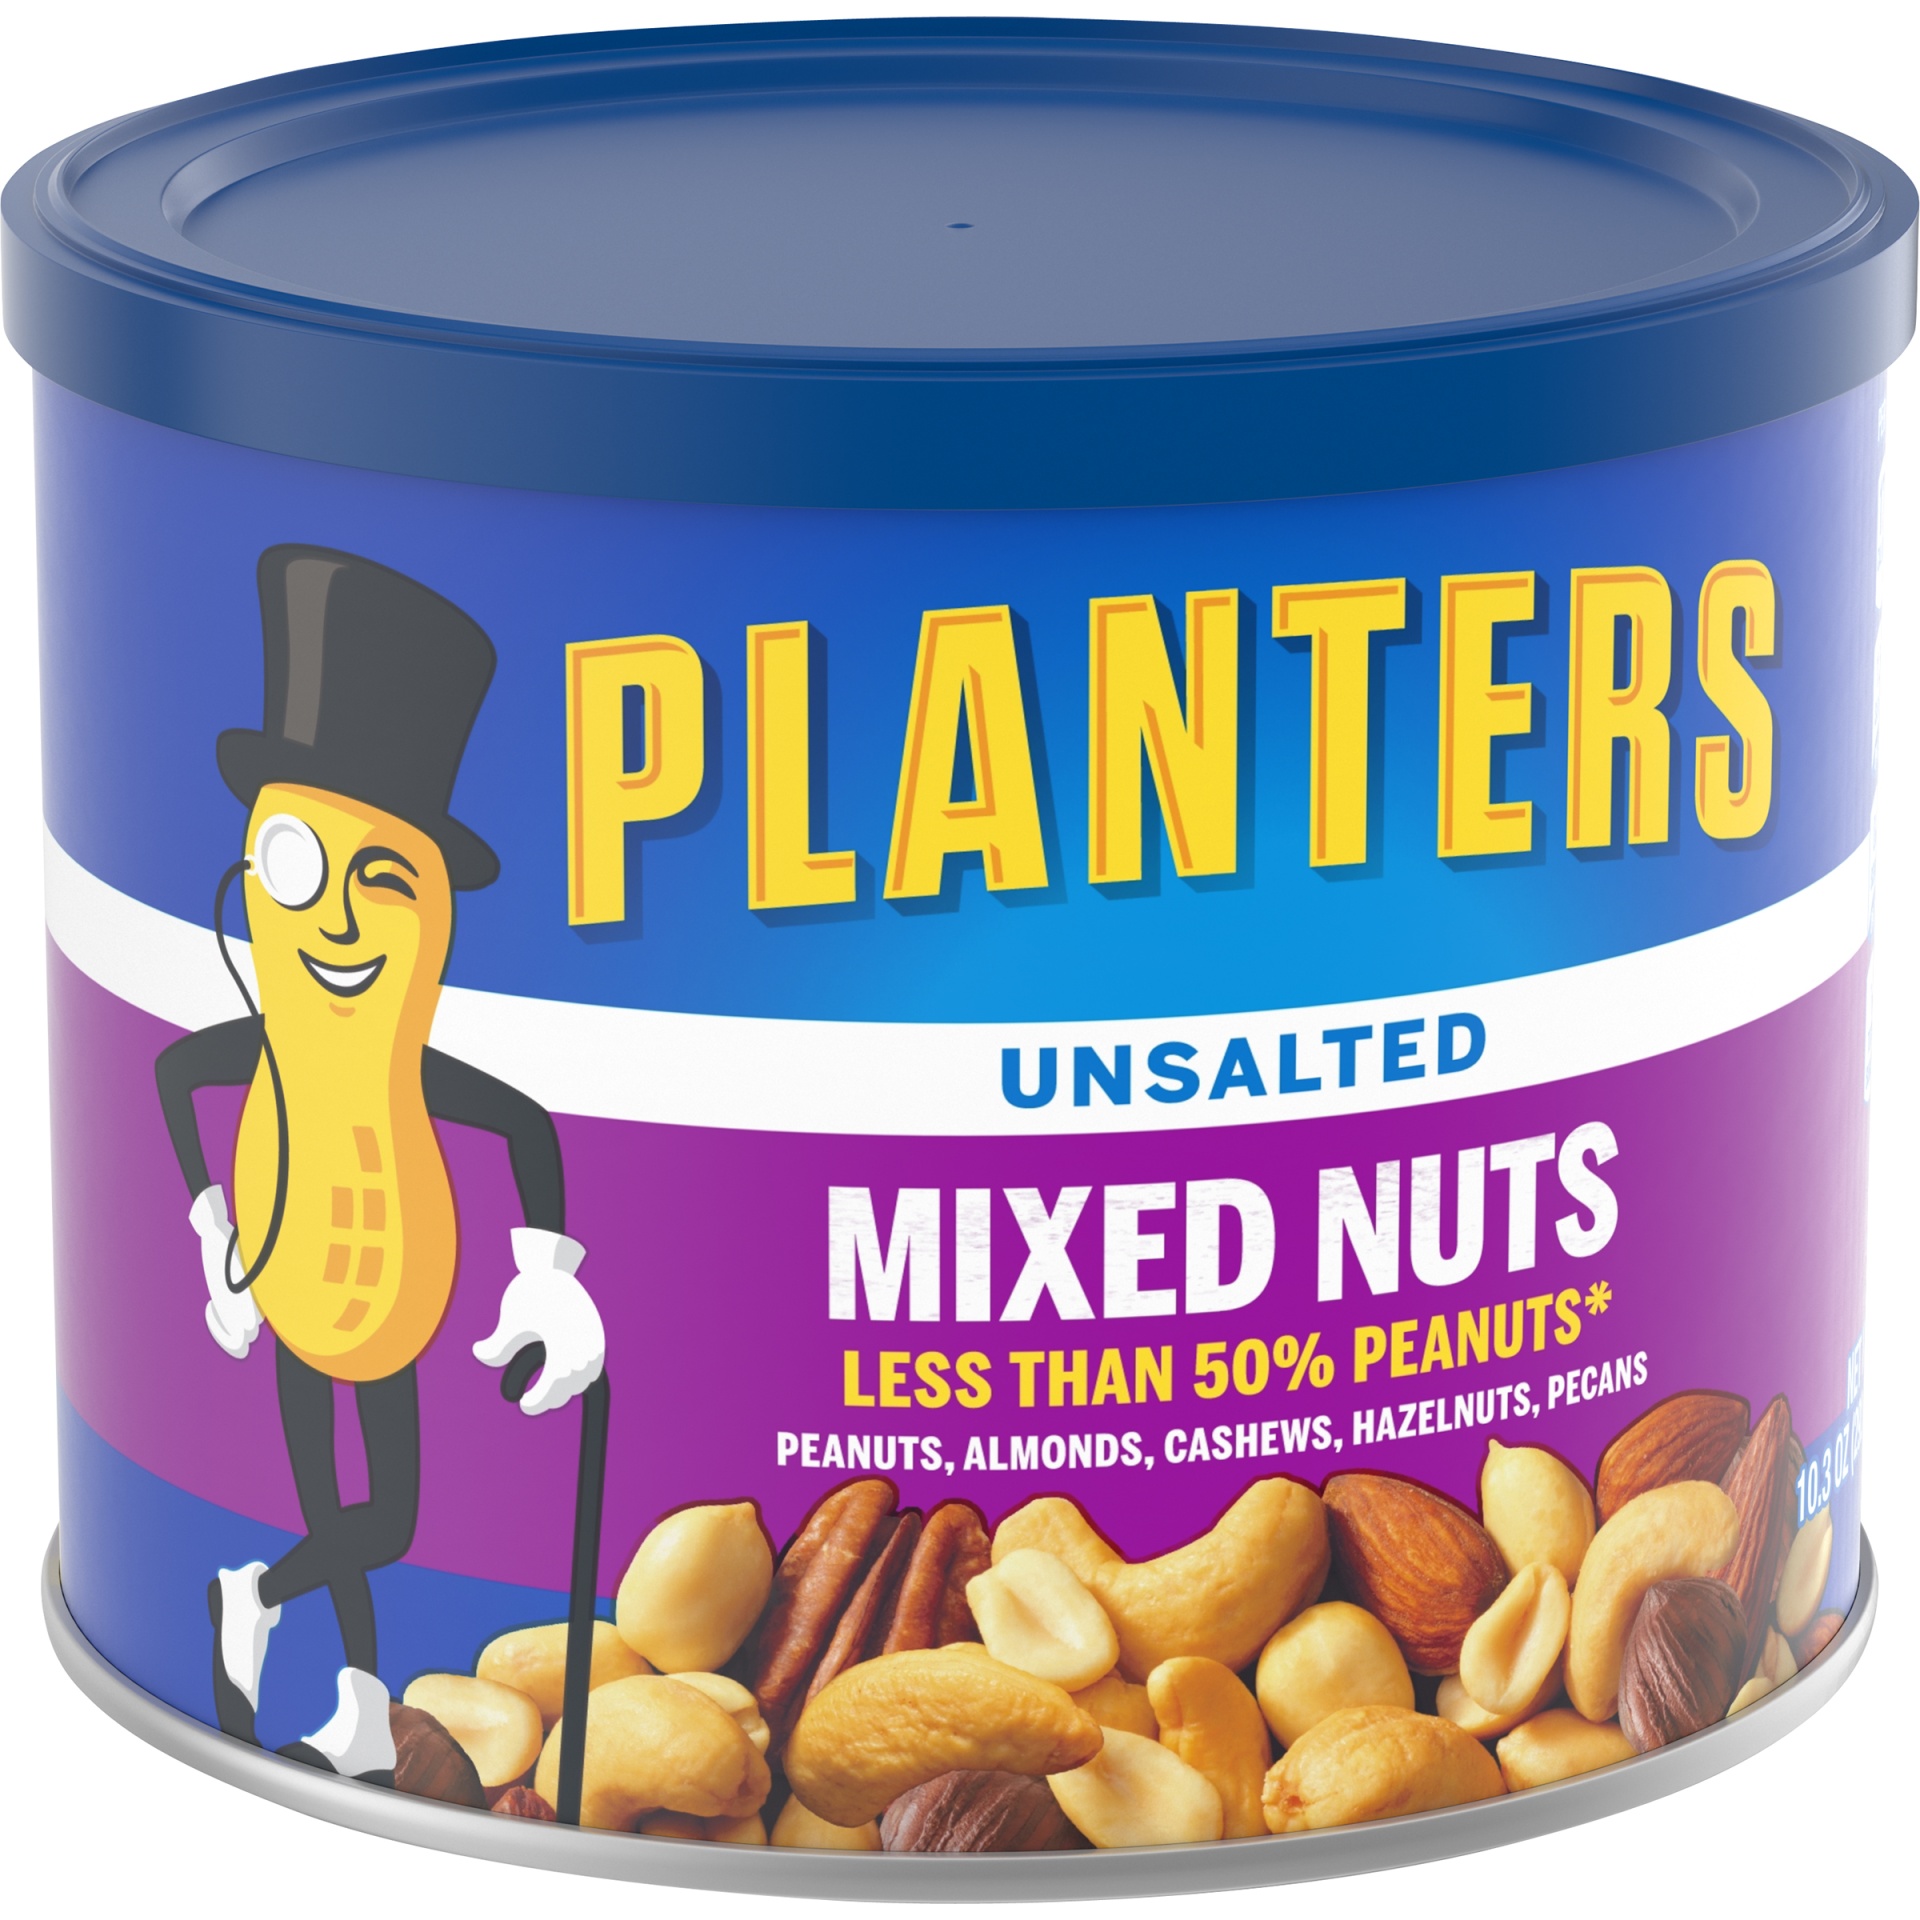 slide 4 of 8, Planters Unsalted Mixed Nuts Less Than 50% Peanuts with Peanuts, Almonds, Cashews, Hazelnuts & Pecans, 10.3 oz